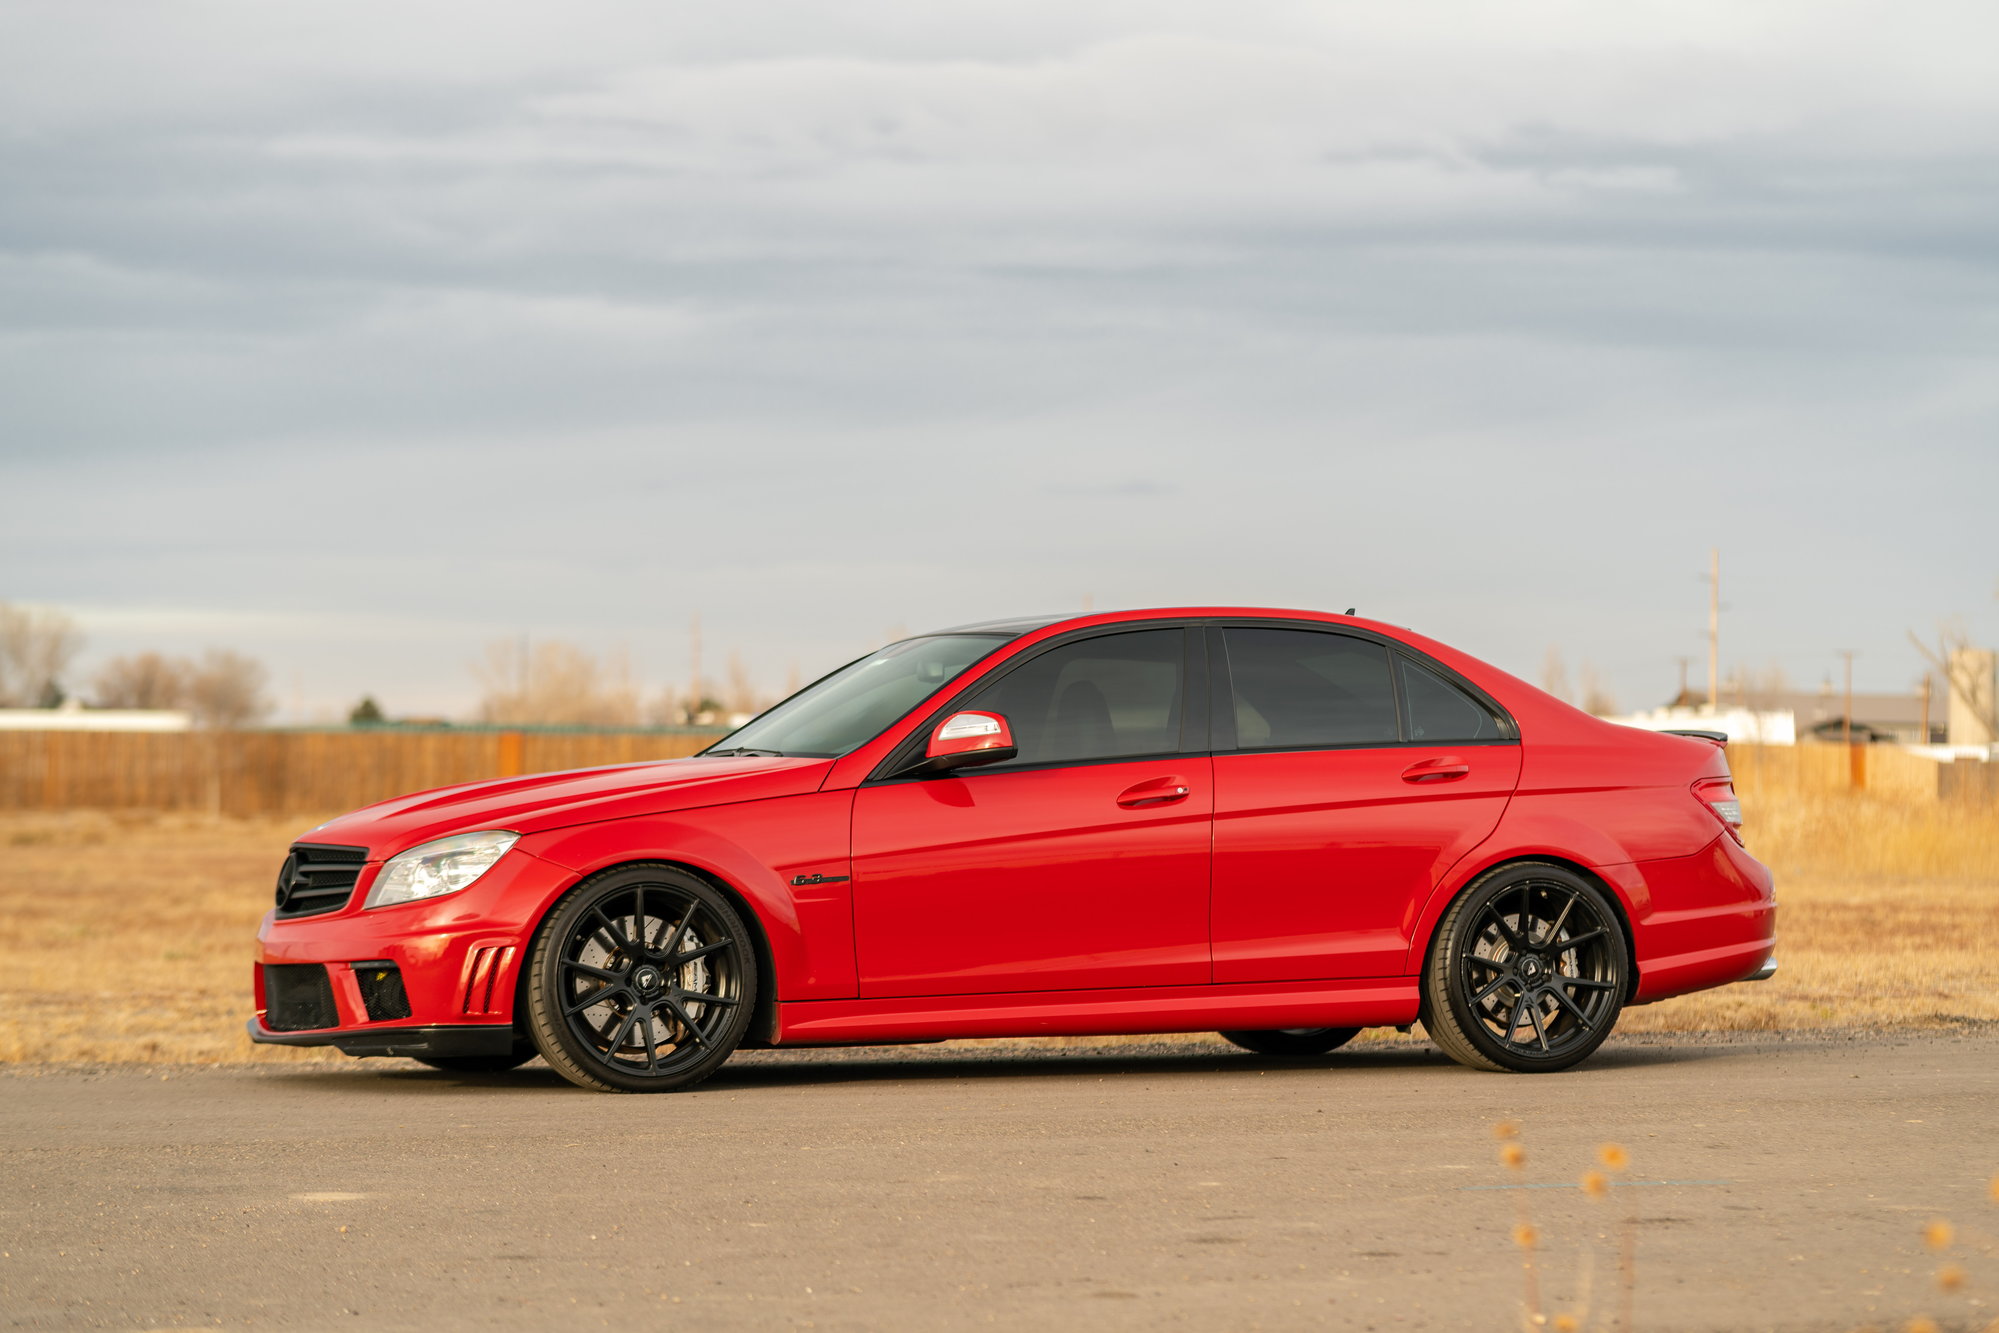 2009 Mercedes-Benz C63 AMG - Fire Opal Red 2009 Mercedes-Benz C63 AMG w/ P30 Package - Used - VIN WDDGF77X69F323106 - 88,700 Miles - 8 cyl - 2WD - Automatic - Sedan - Red - Frederick, CO 80530, United States